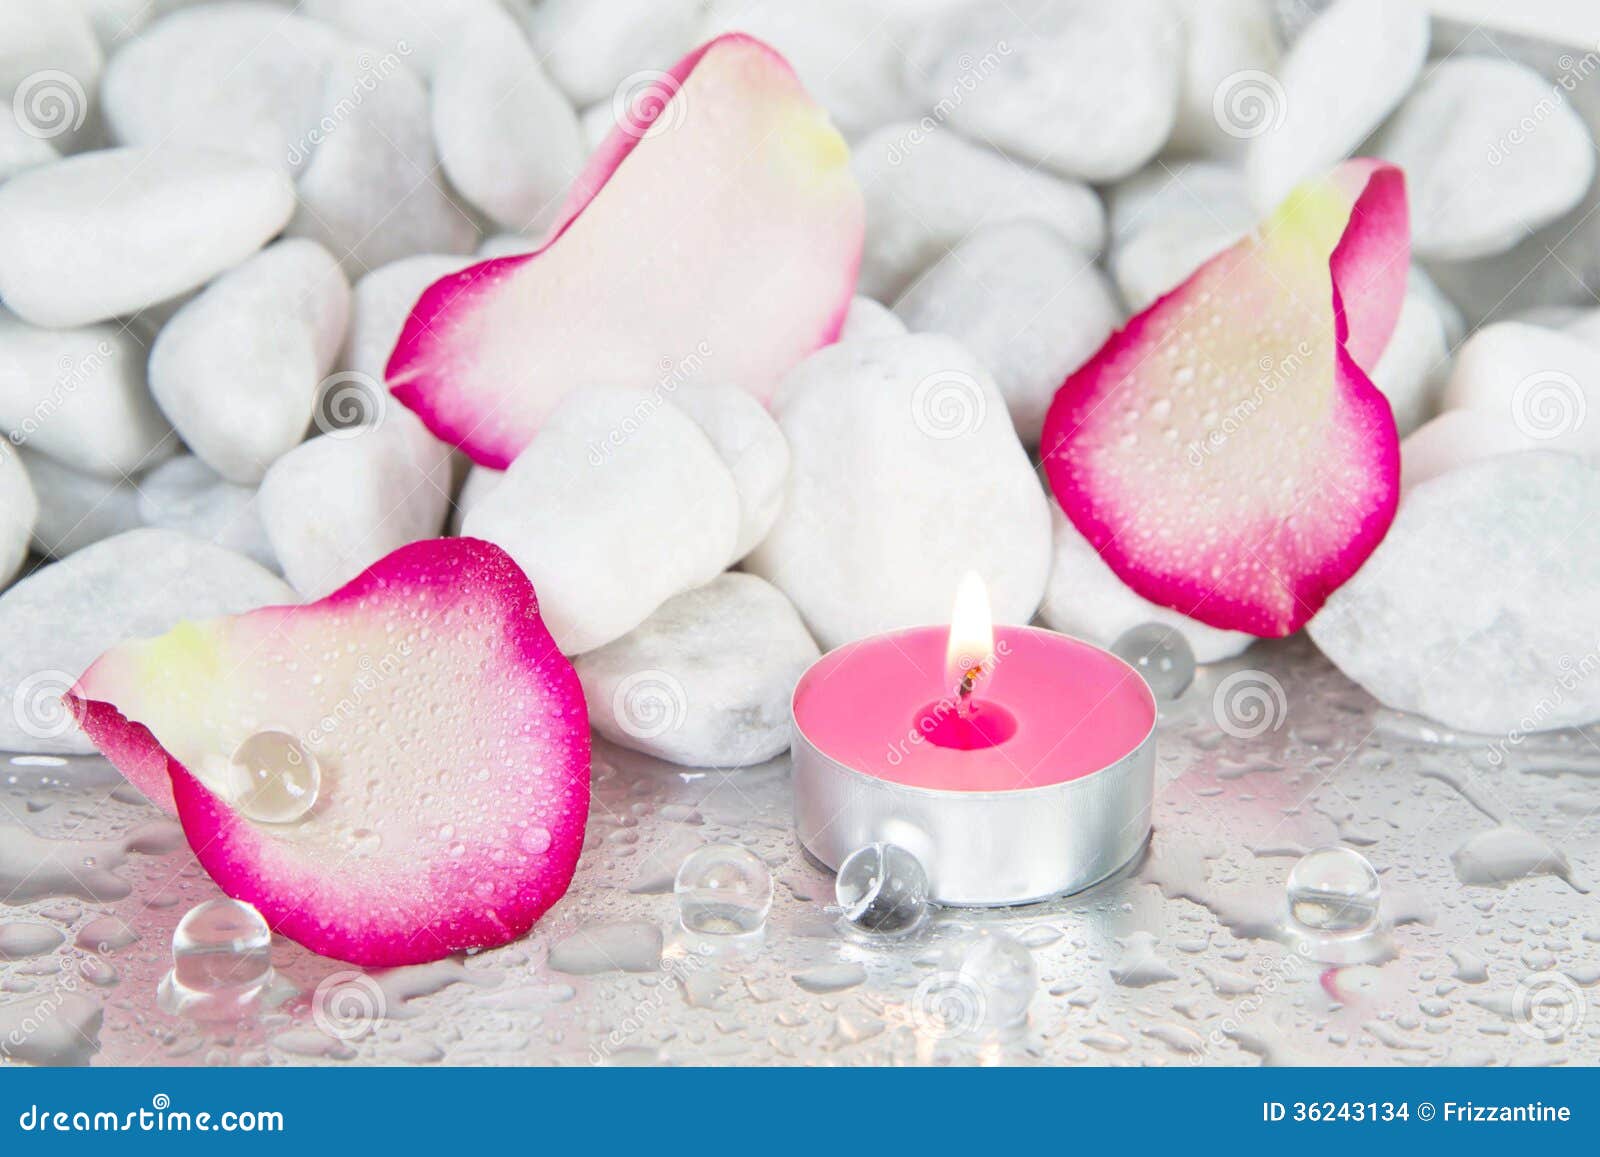 Rose Petals And A Lit Candle For A Spa Decoration Stock Images ...